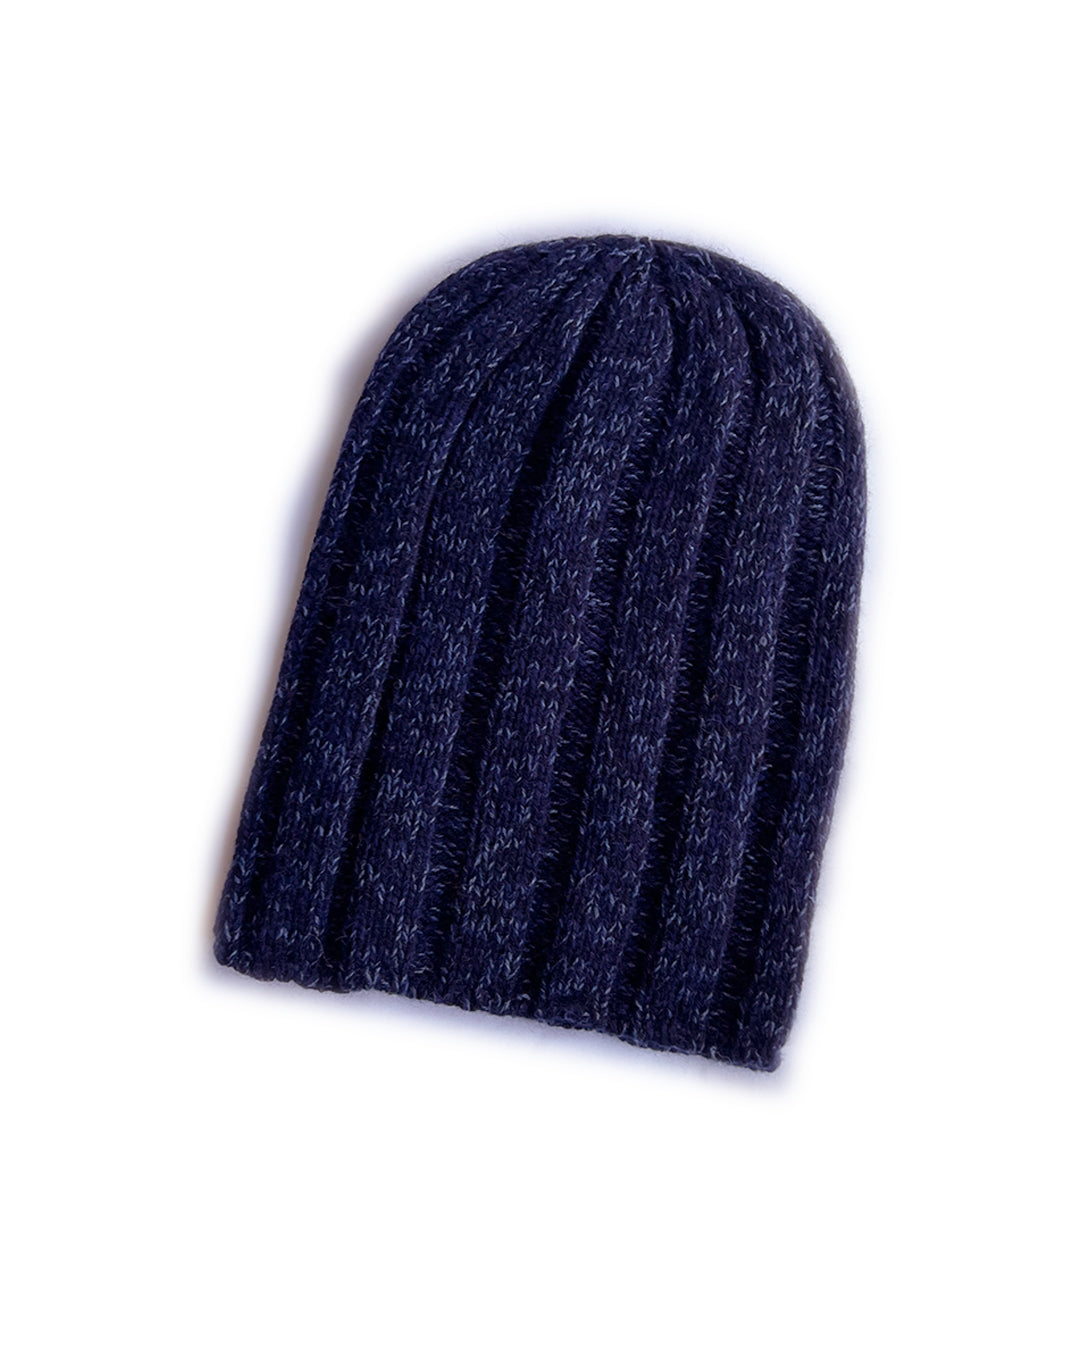 Navy Blue Black Blended Ribbed Cashmere Beanie | cukimber designs